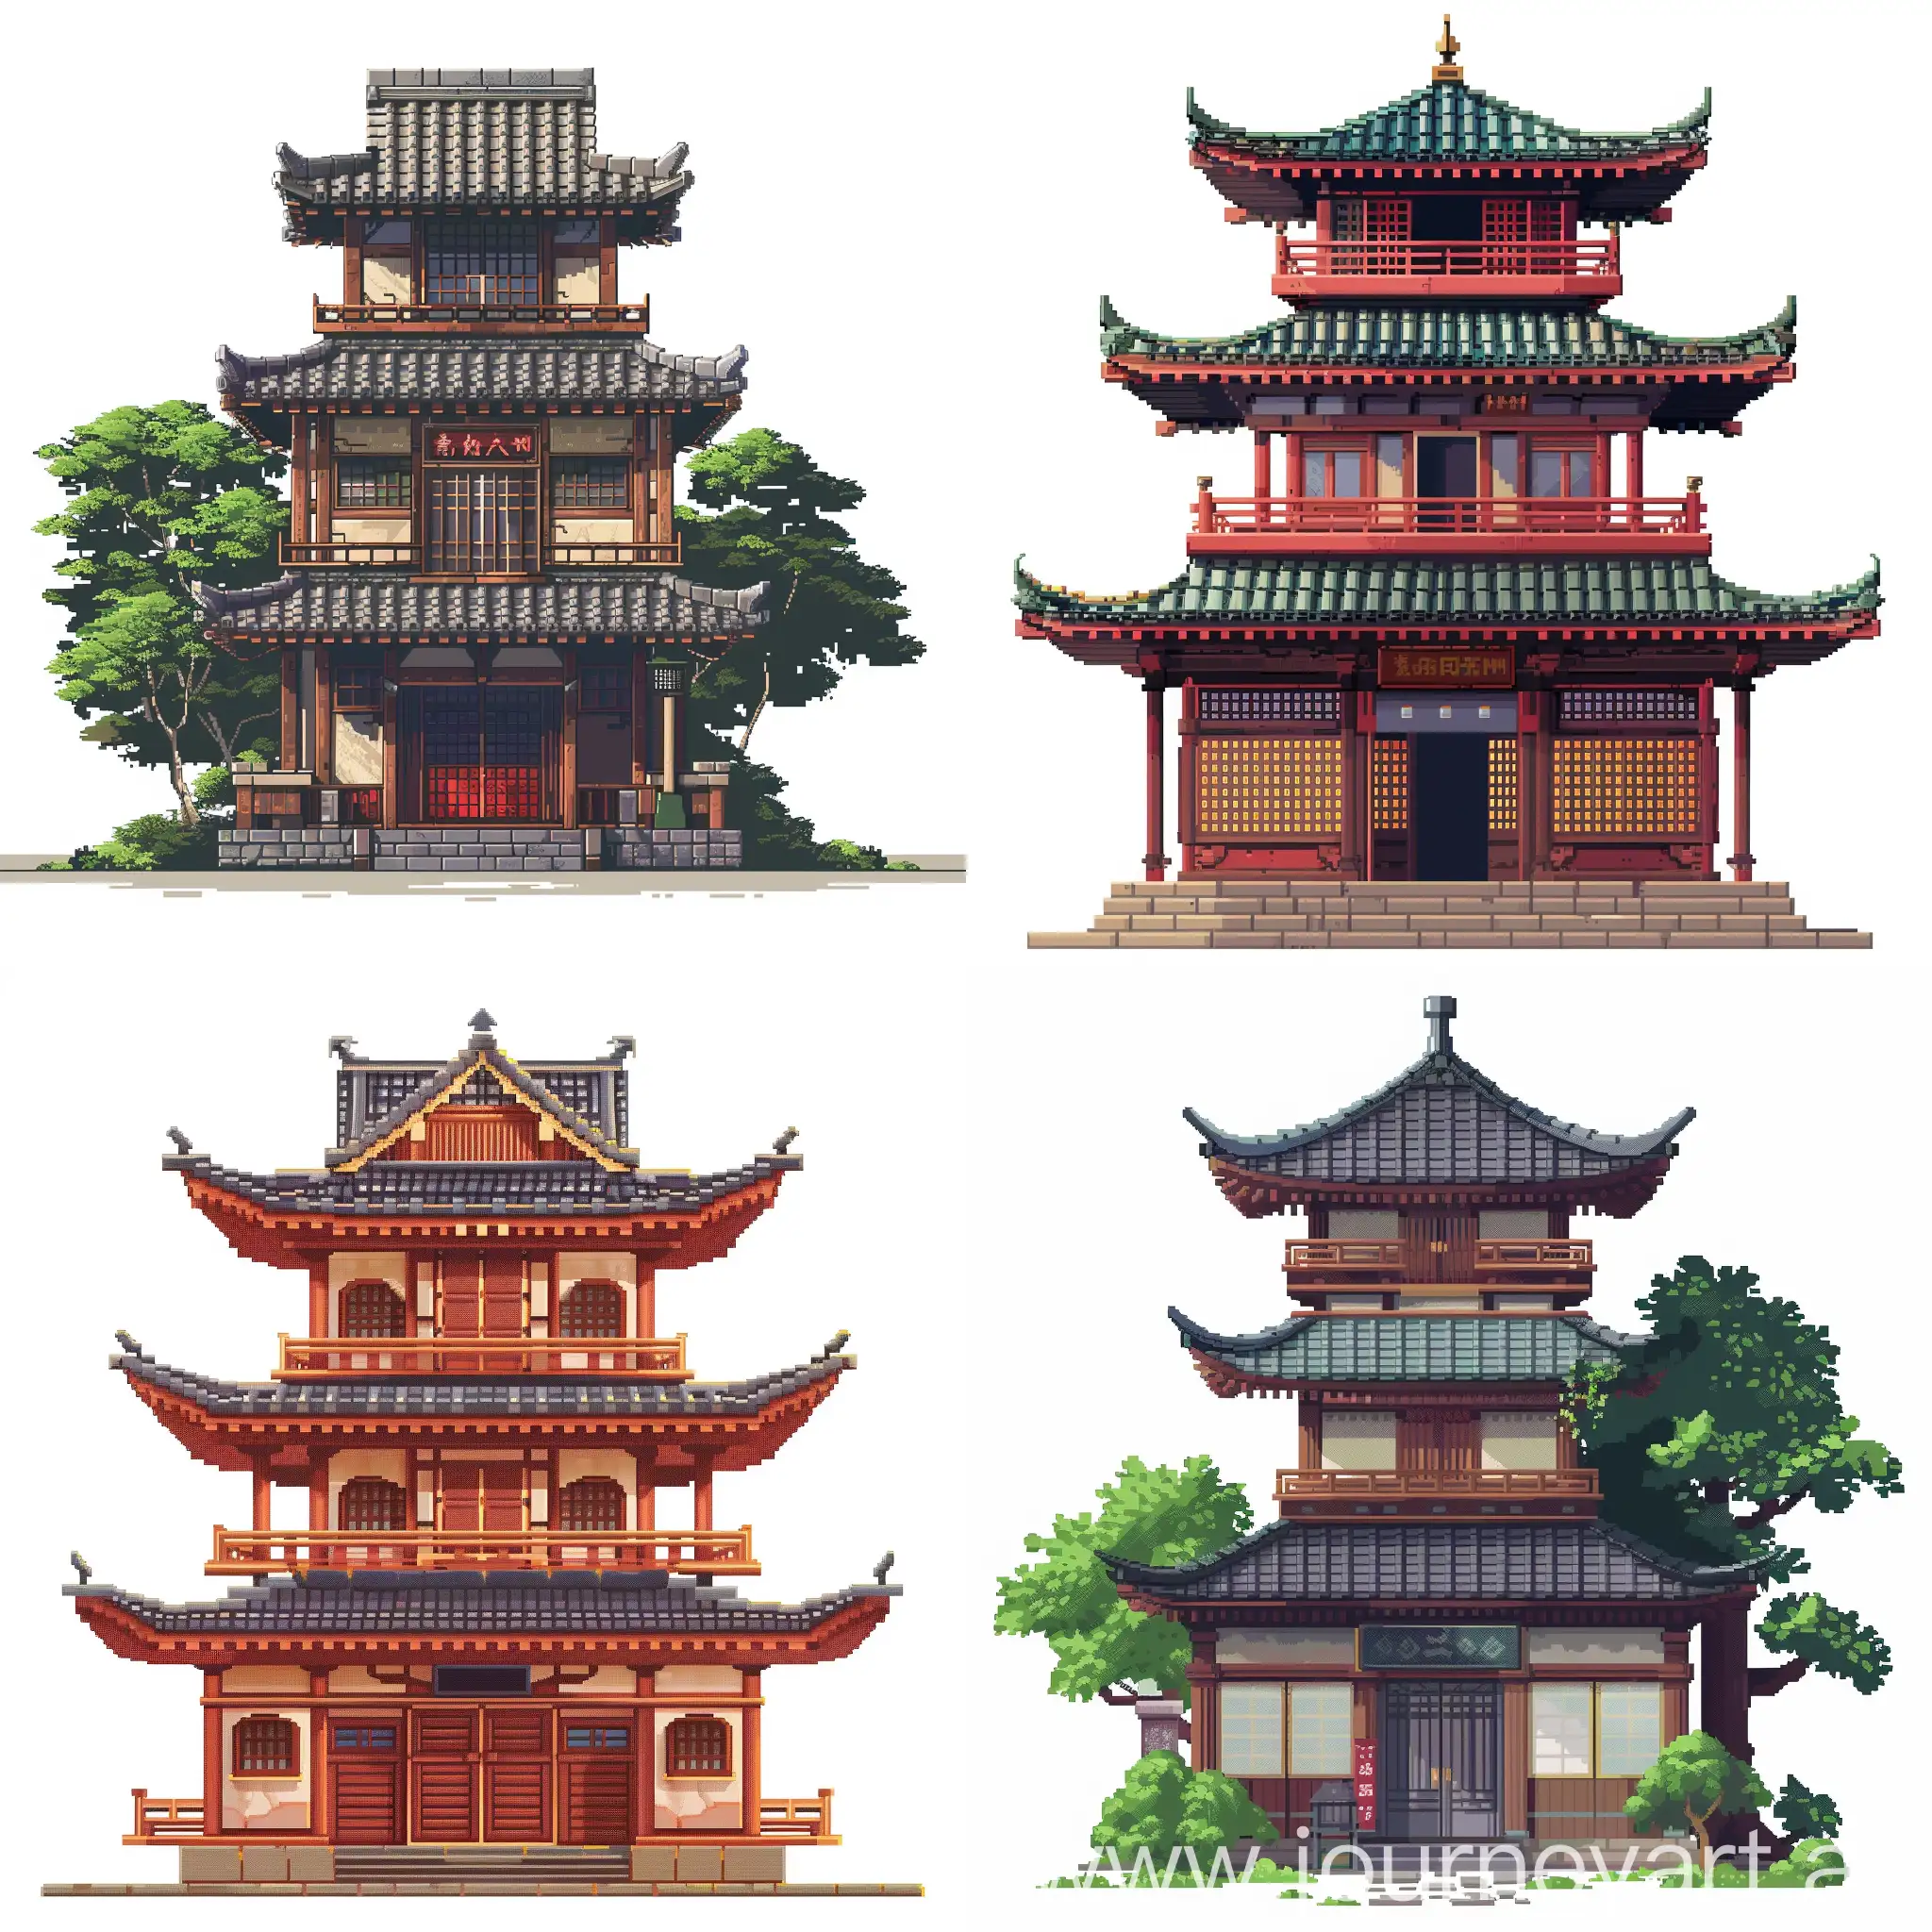 Typical ancient Japanese building with pixel art style on white background